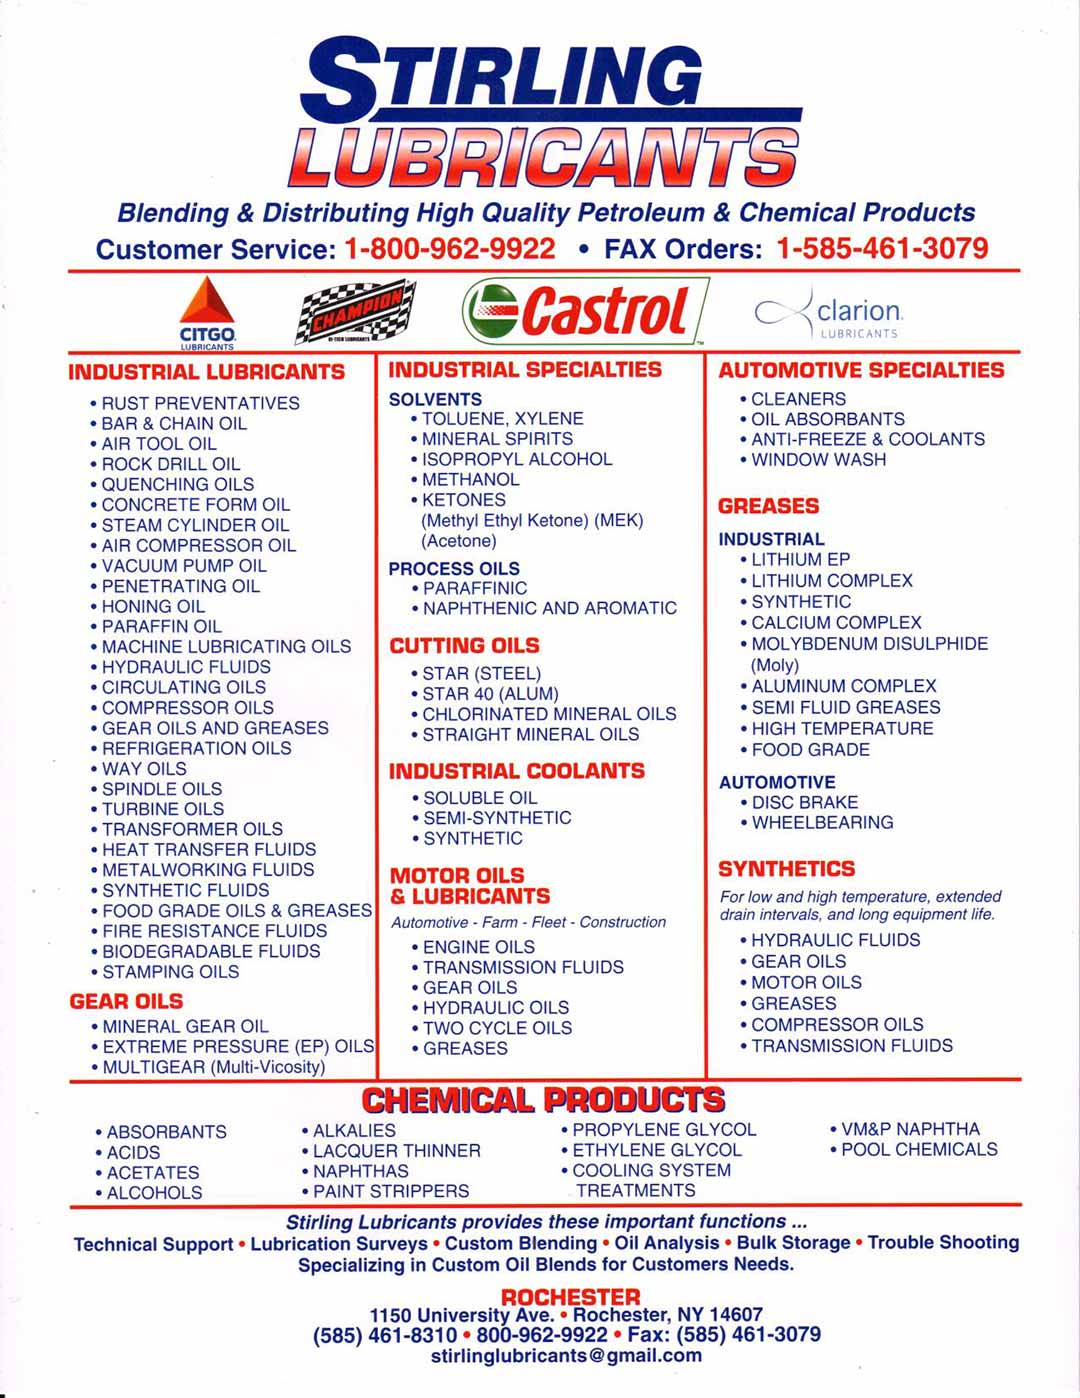 Lubricant products flyer | Rochester, NY | Stirling Lubricants